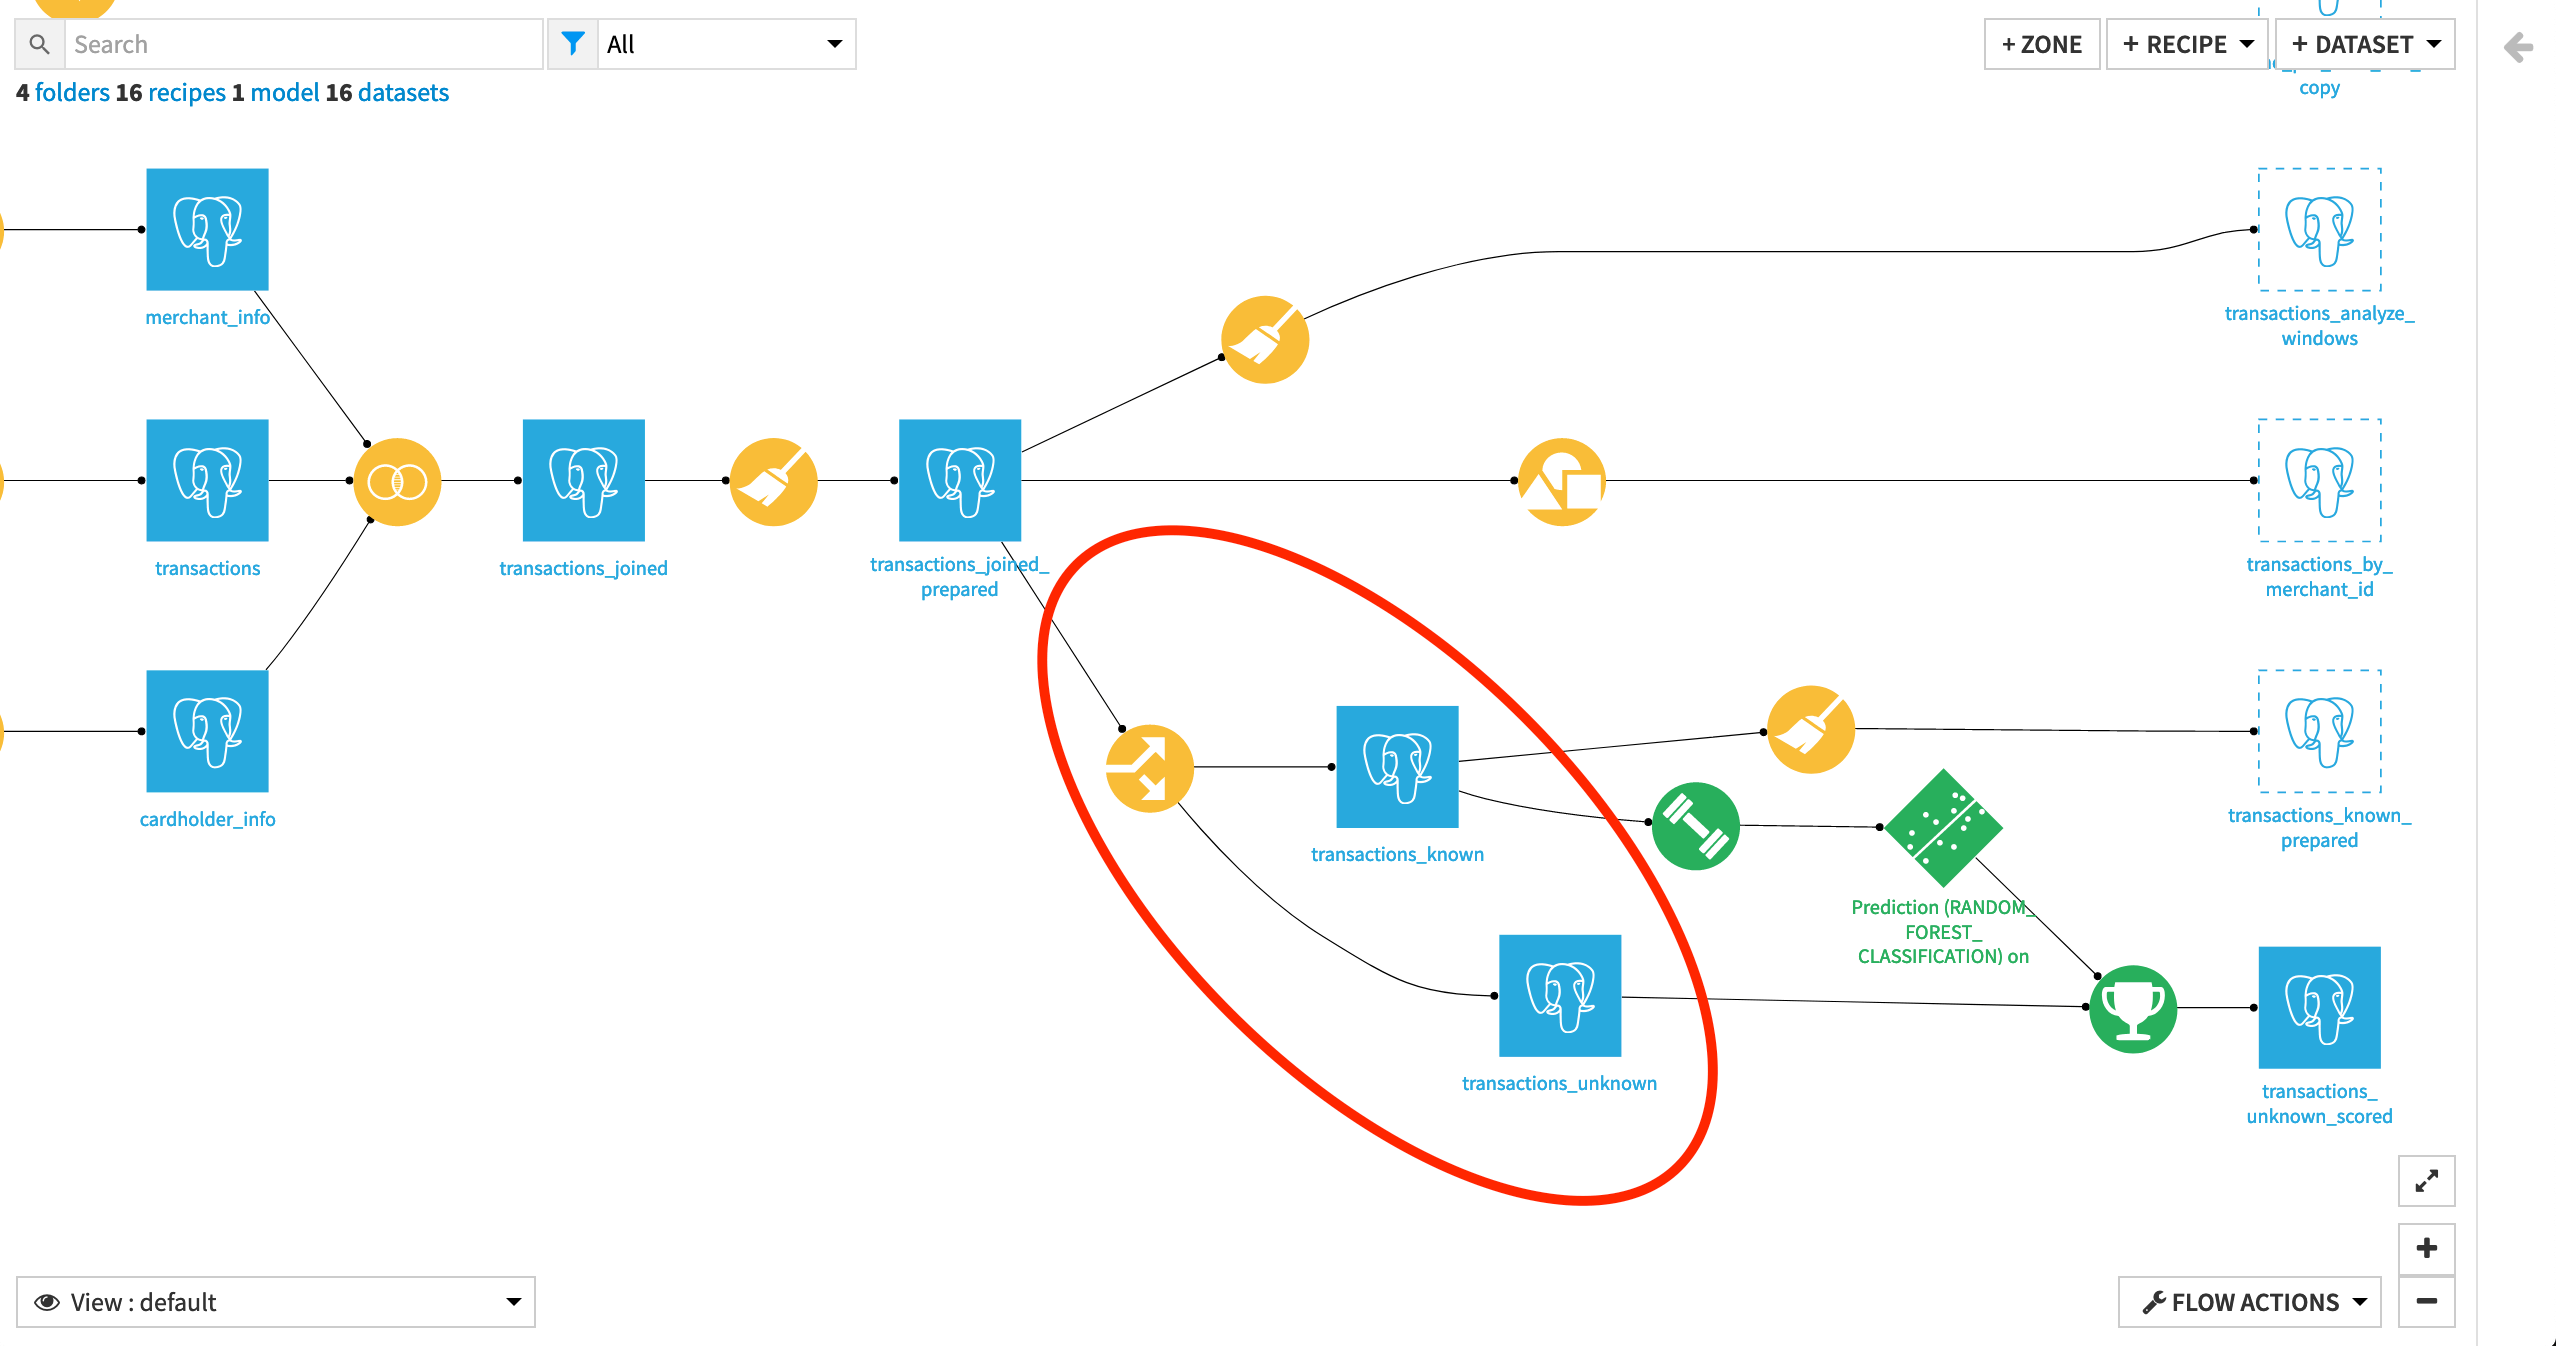 Dataiku screenshot of the Flow highlighting the Split recipe dividing the transactions data based on whether authorized flag is known.